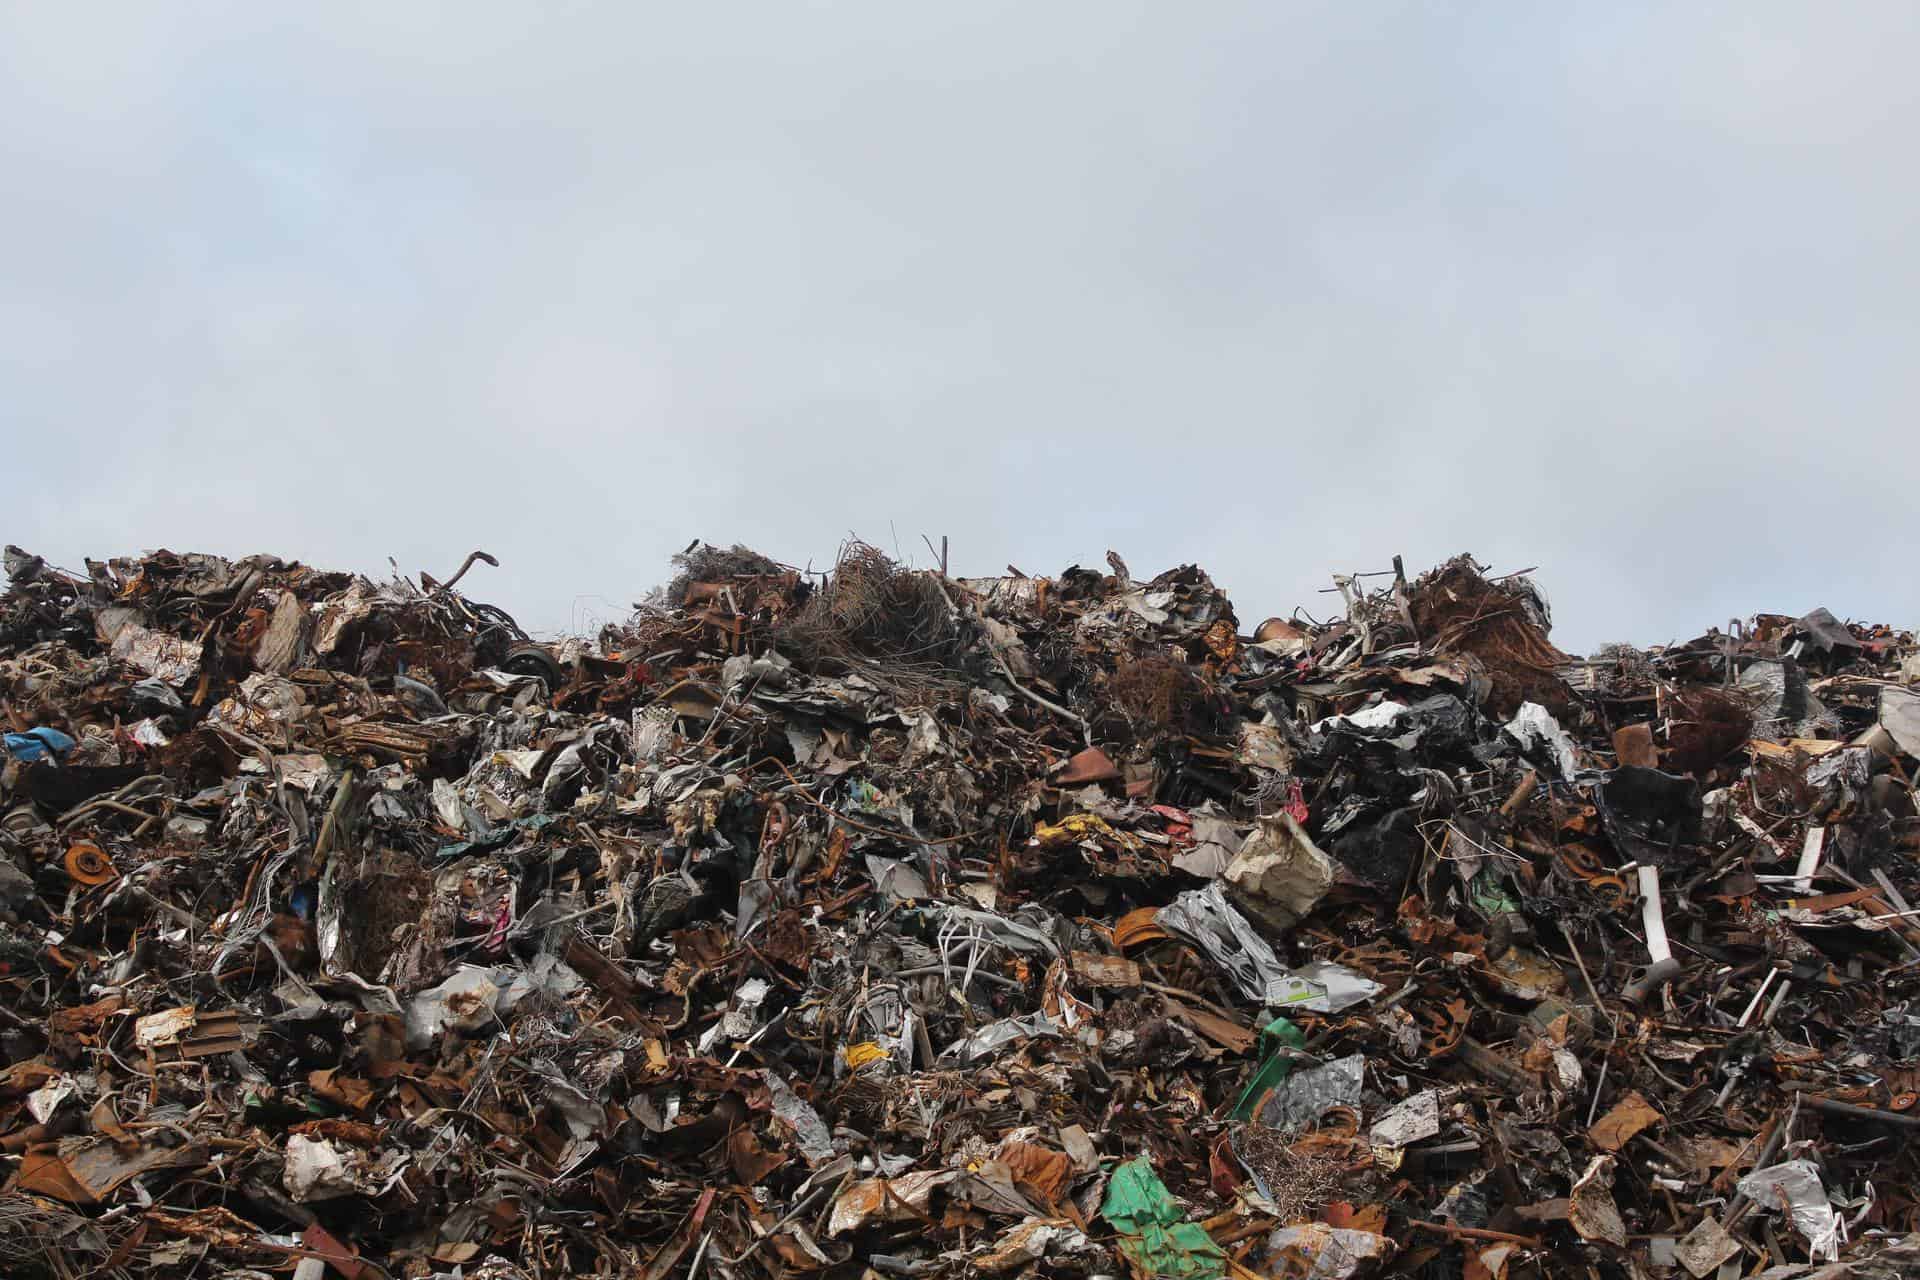 Food waste piled up in a landfill site